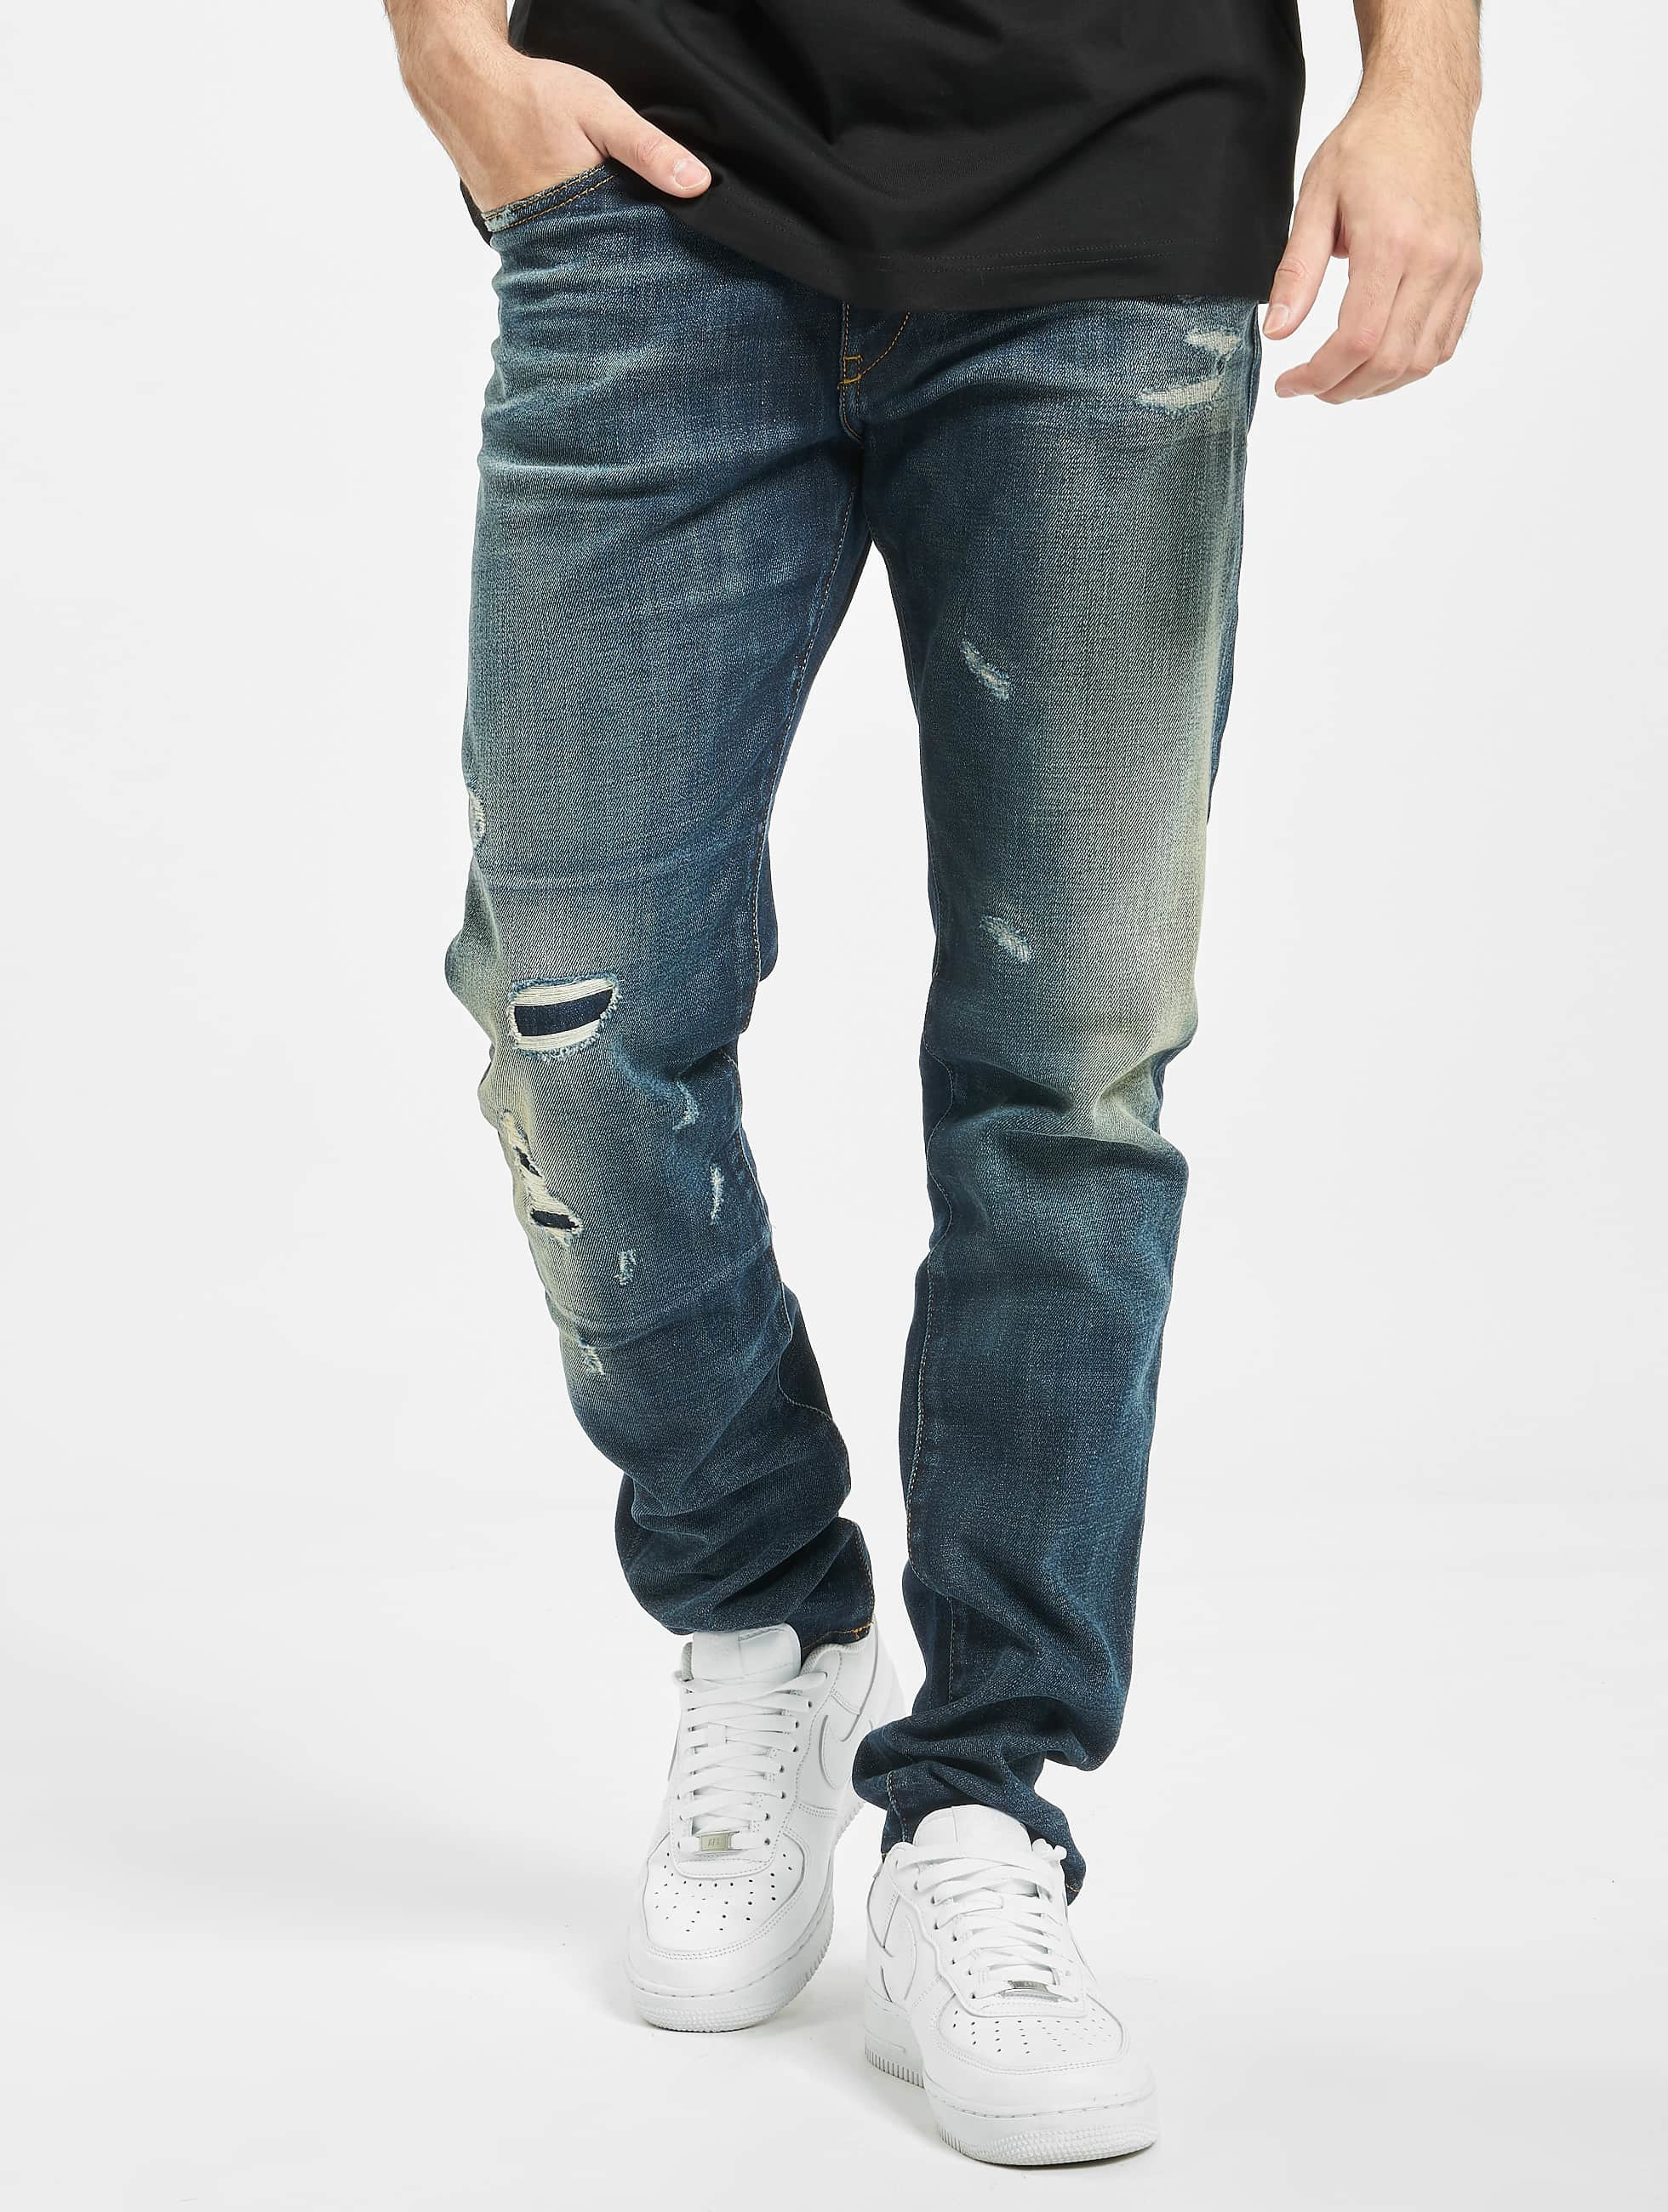 High rise jeans for kids